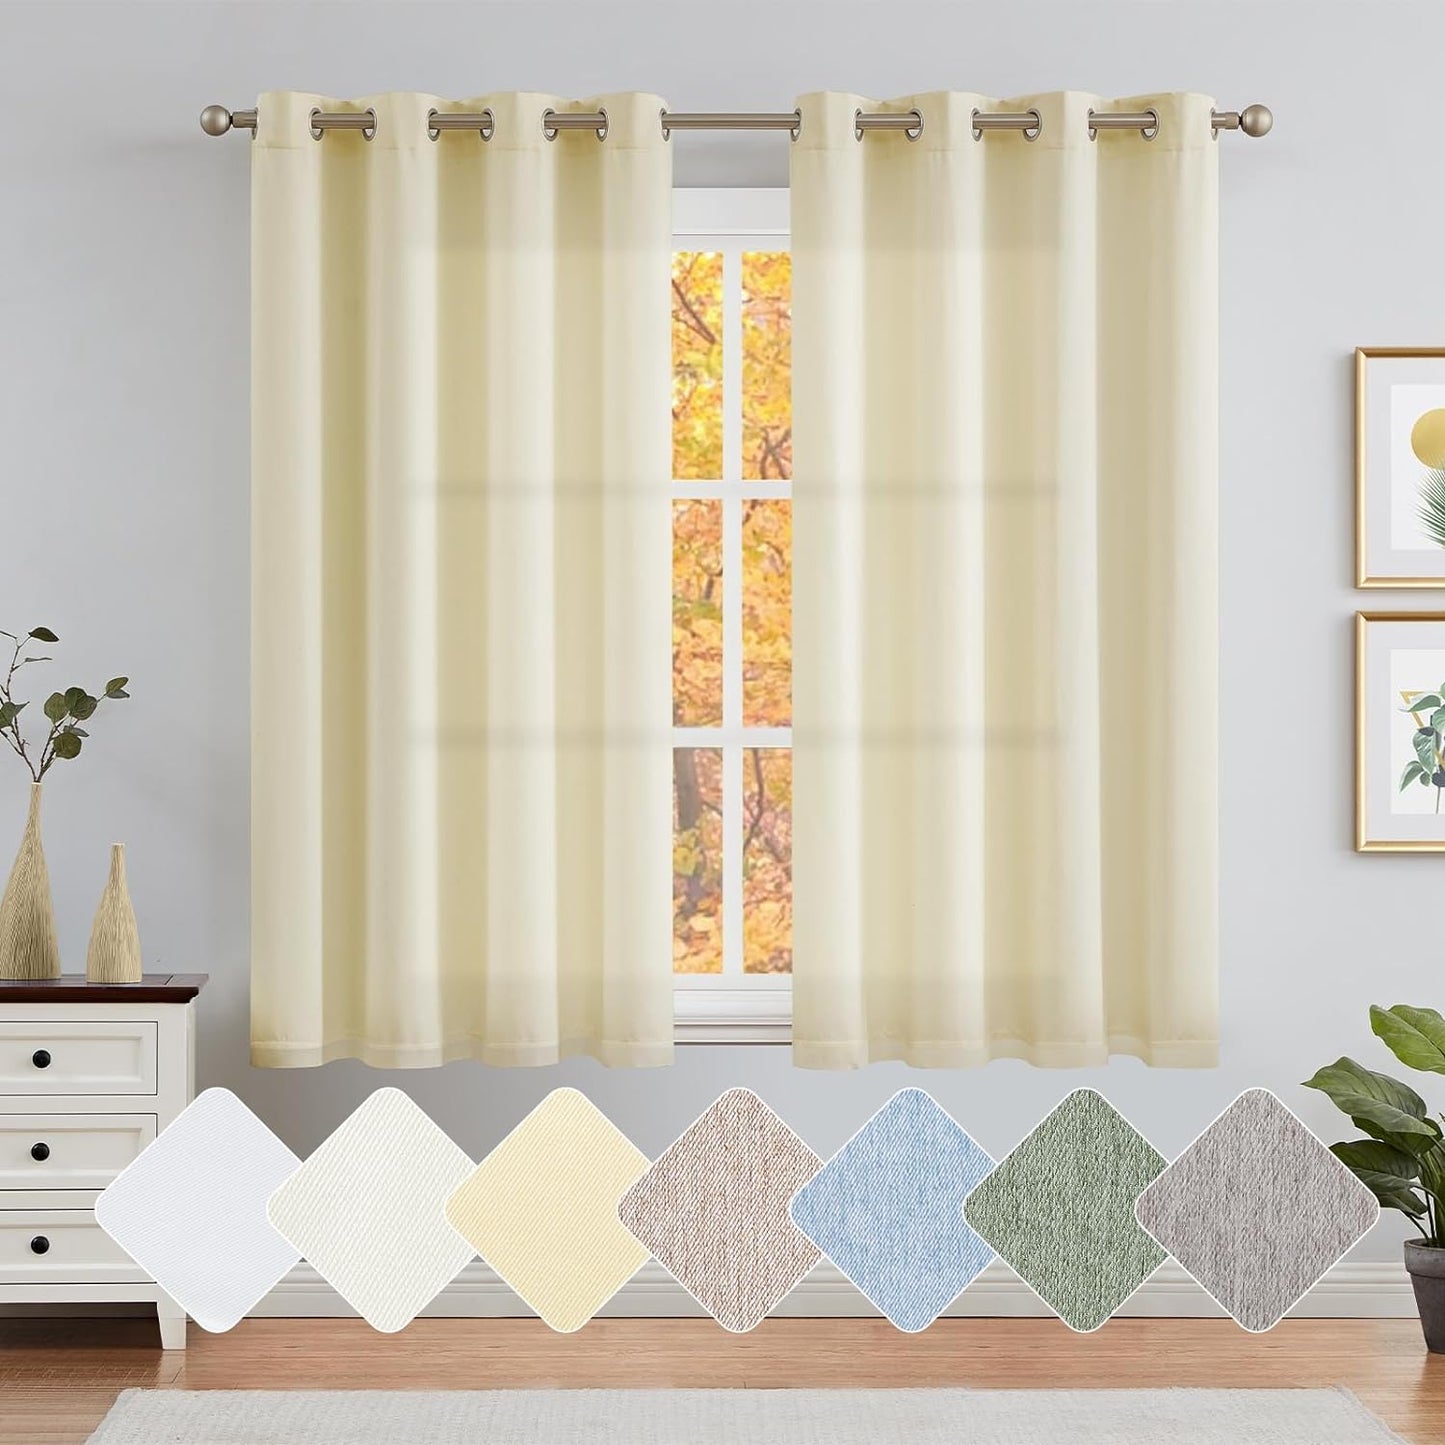 Jinchan Curtains for Bedroom Living Room 84 Inch Long Room Darkening Farmhouse Country Window Curtains Heathered Denim Blue Curtains Grommet Curtains Drapes 2 Panels  CKNY HOME FASHION *Beige 50"W X 63"L 